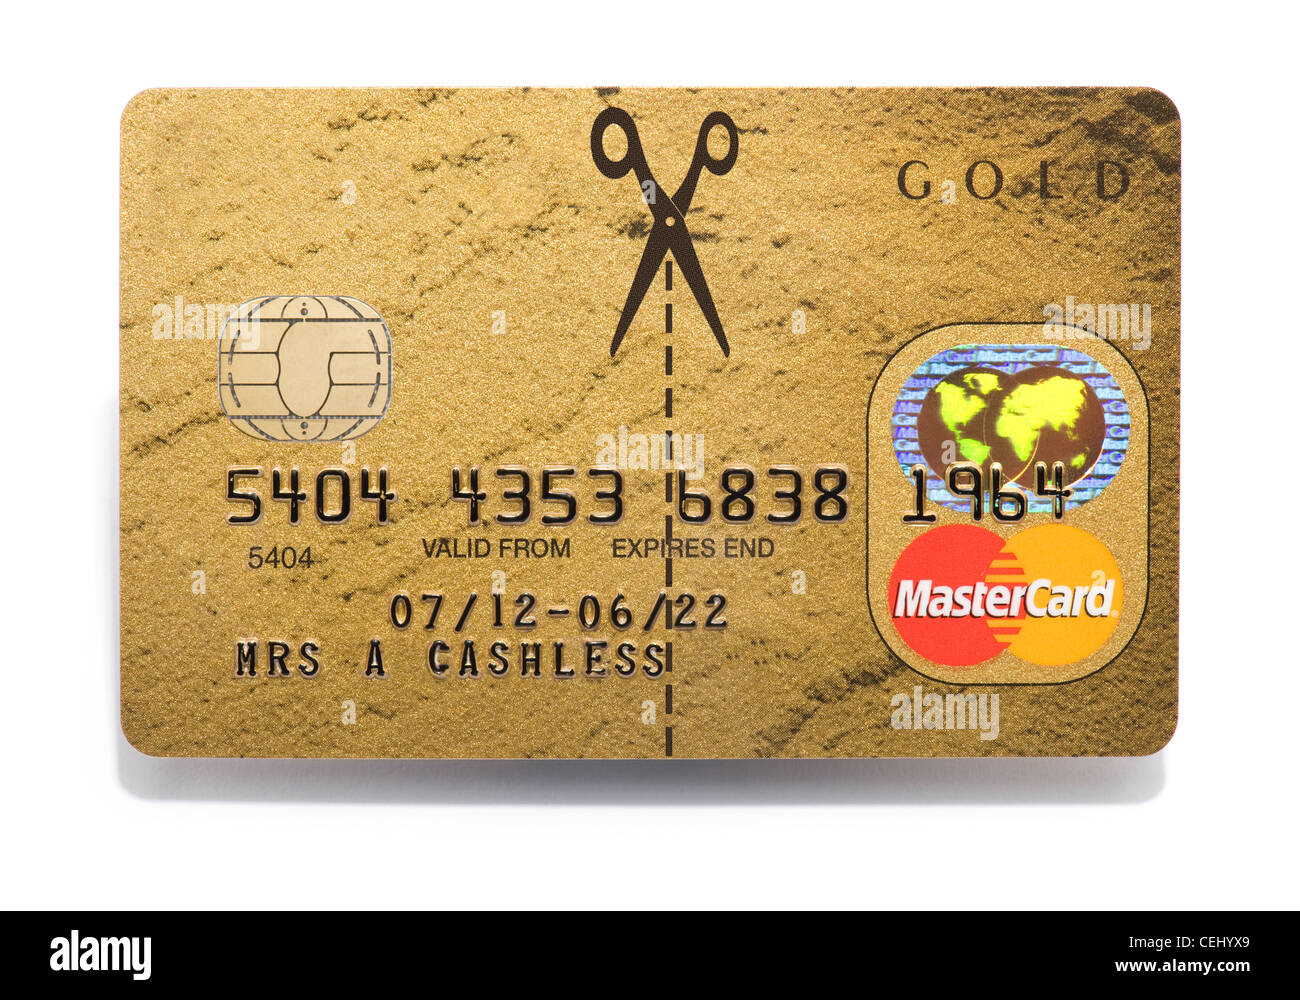 Scissors cutting up a MasterCard credit card Stock Photo